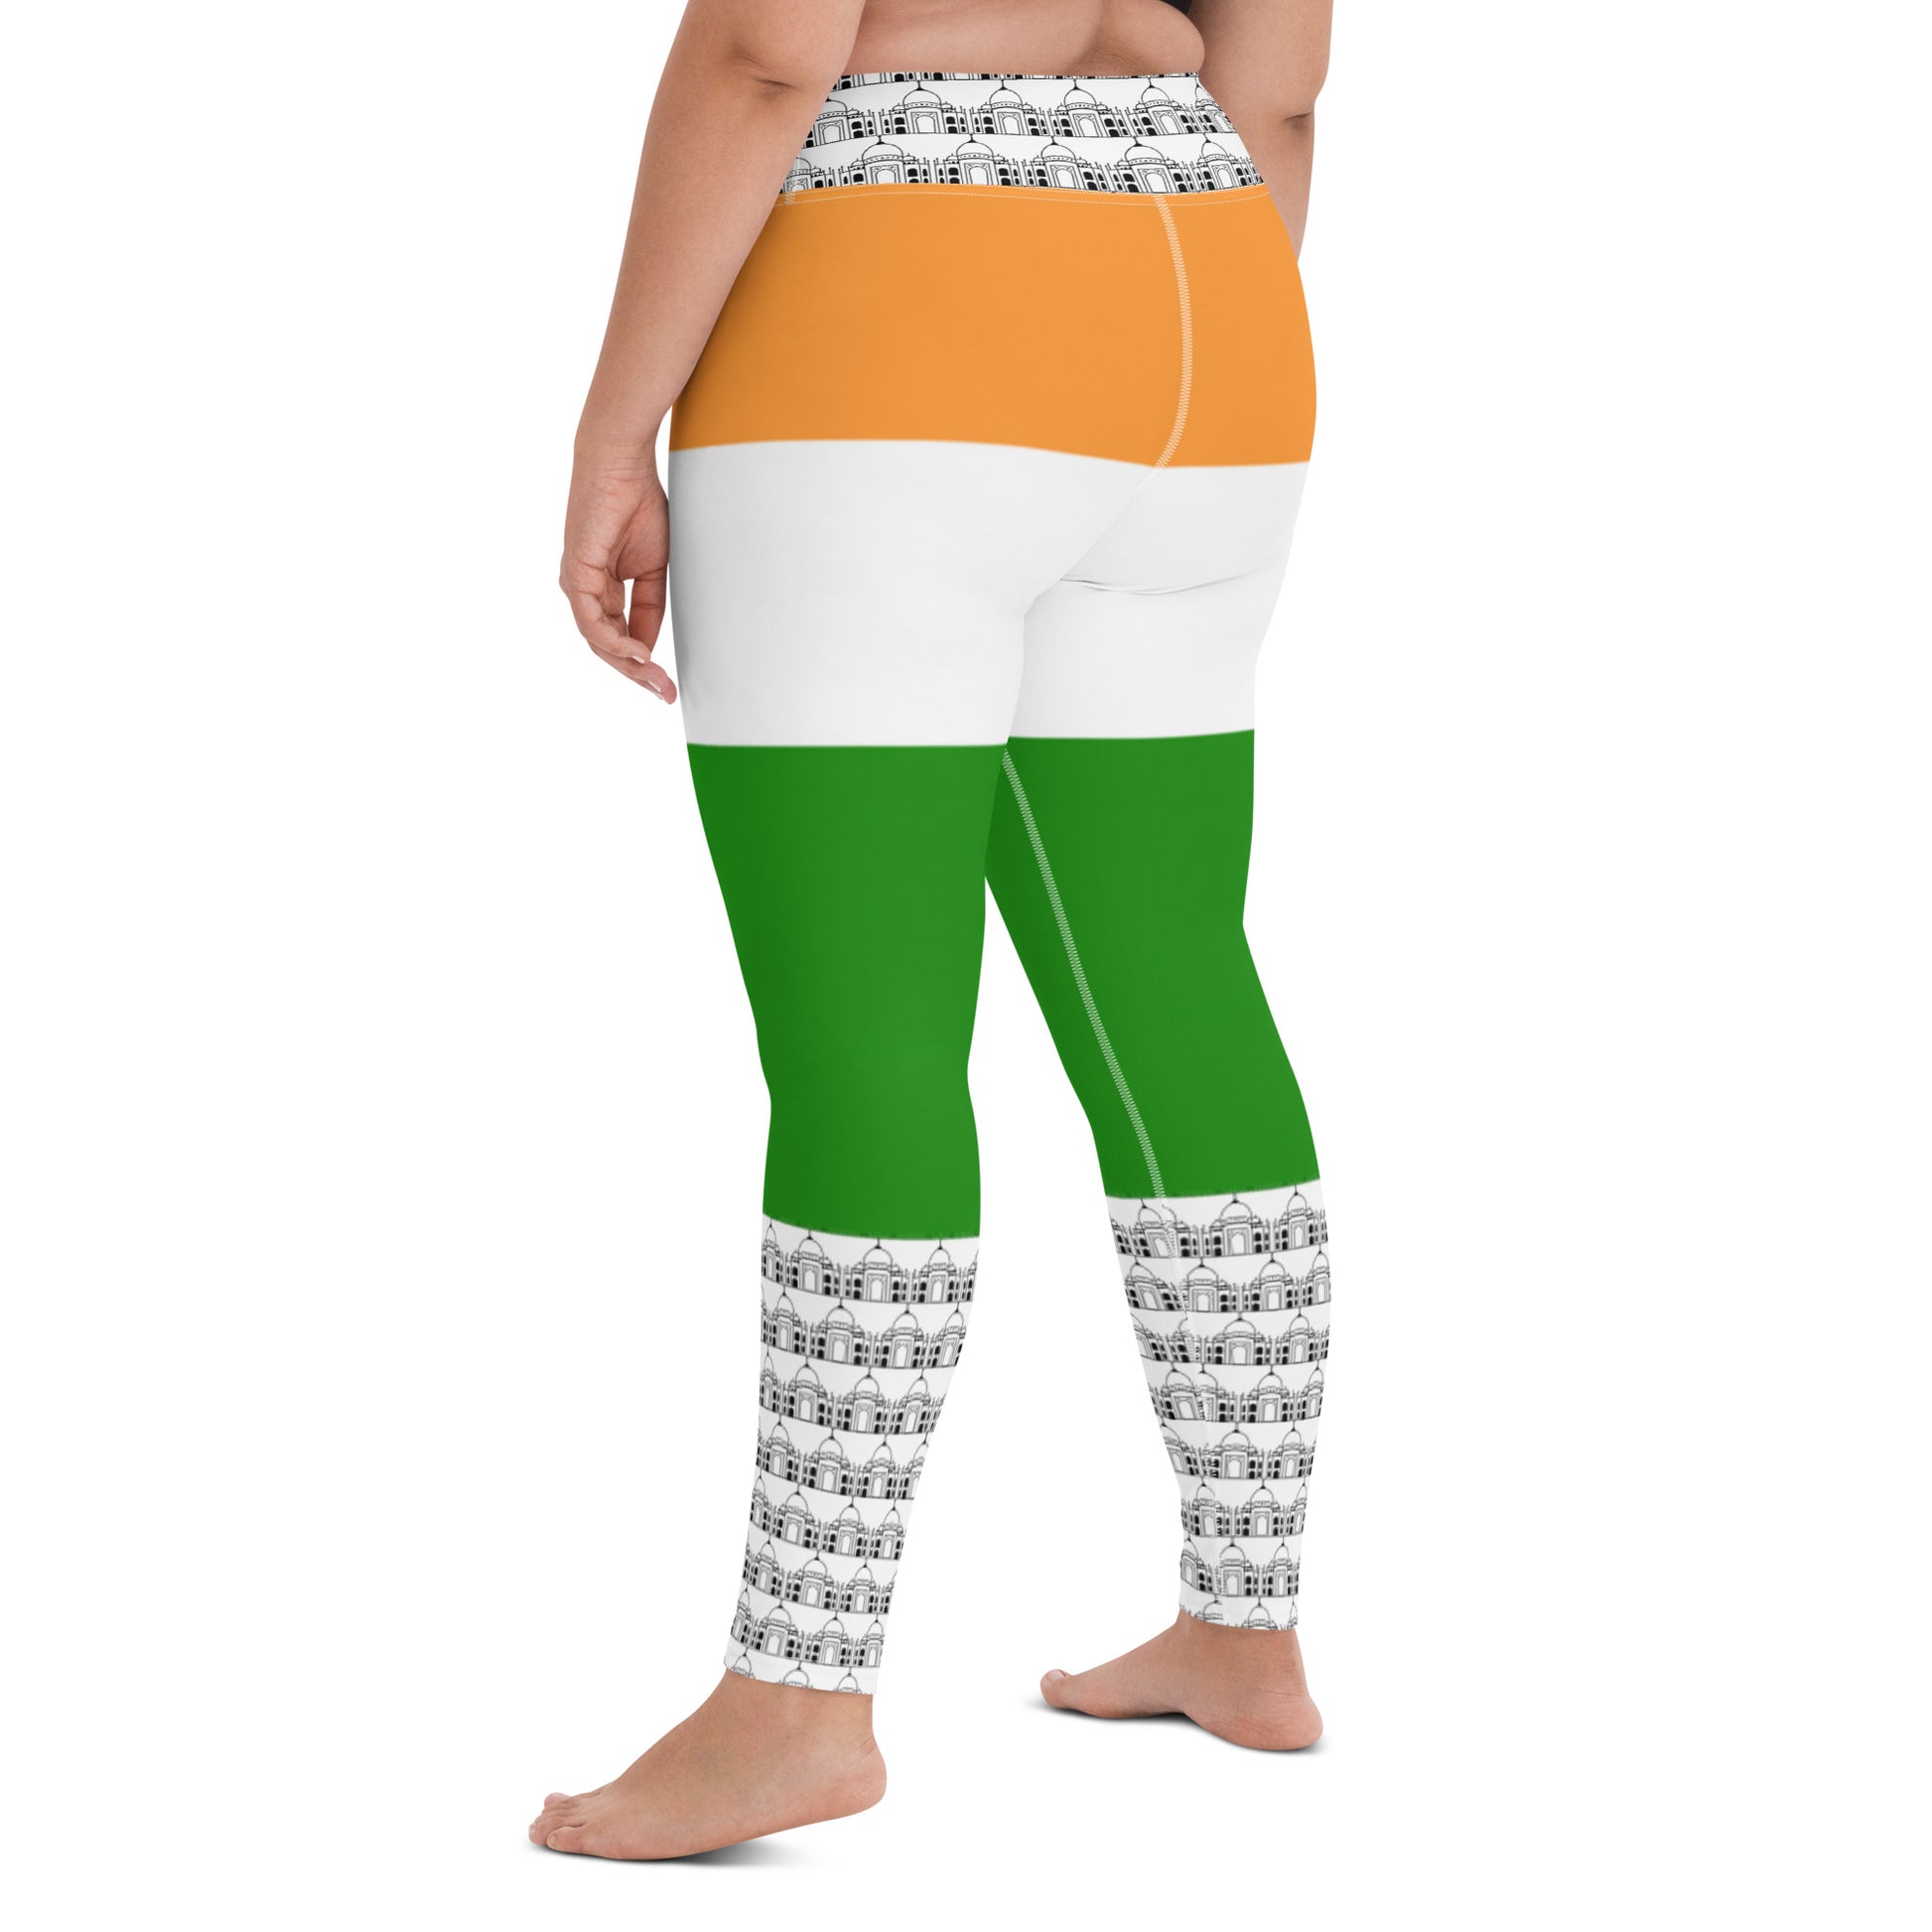 India Leggings Flag Printed Color / Indian Style Leggings For Patriotic With Inside Pocket